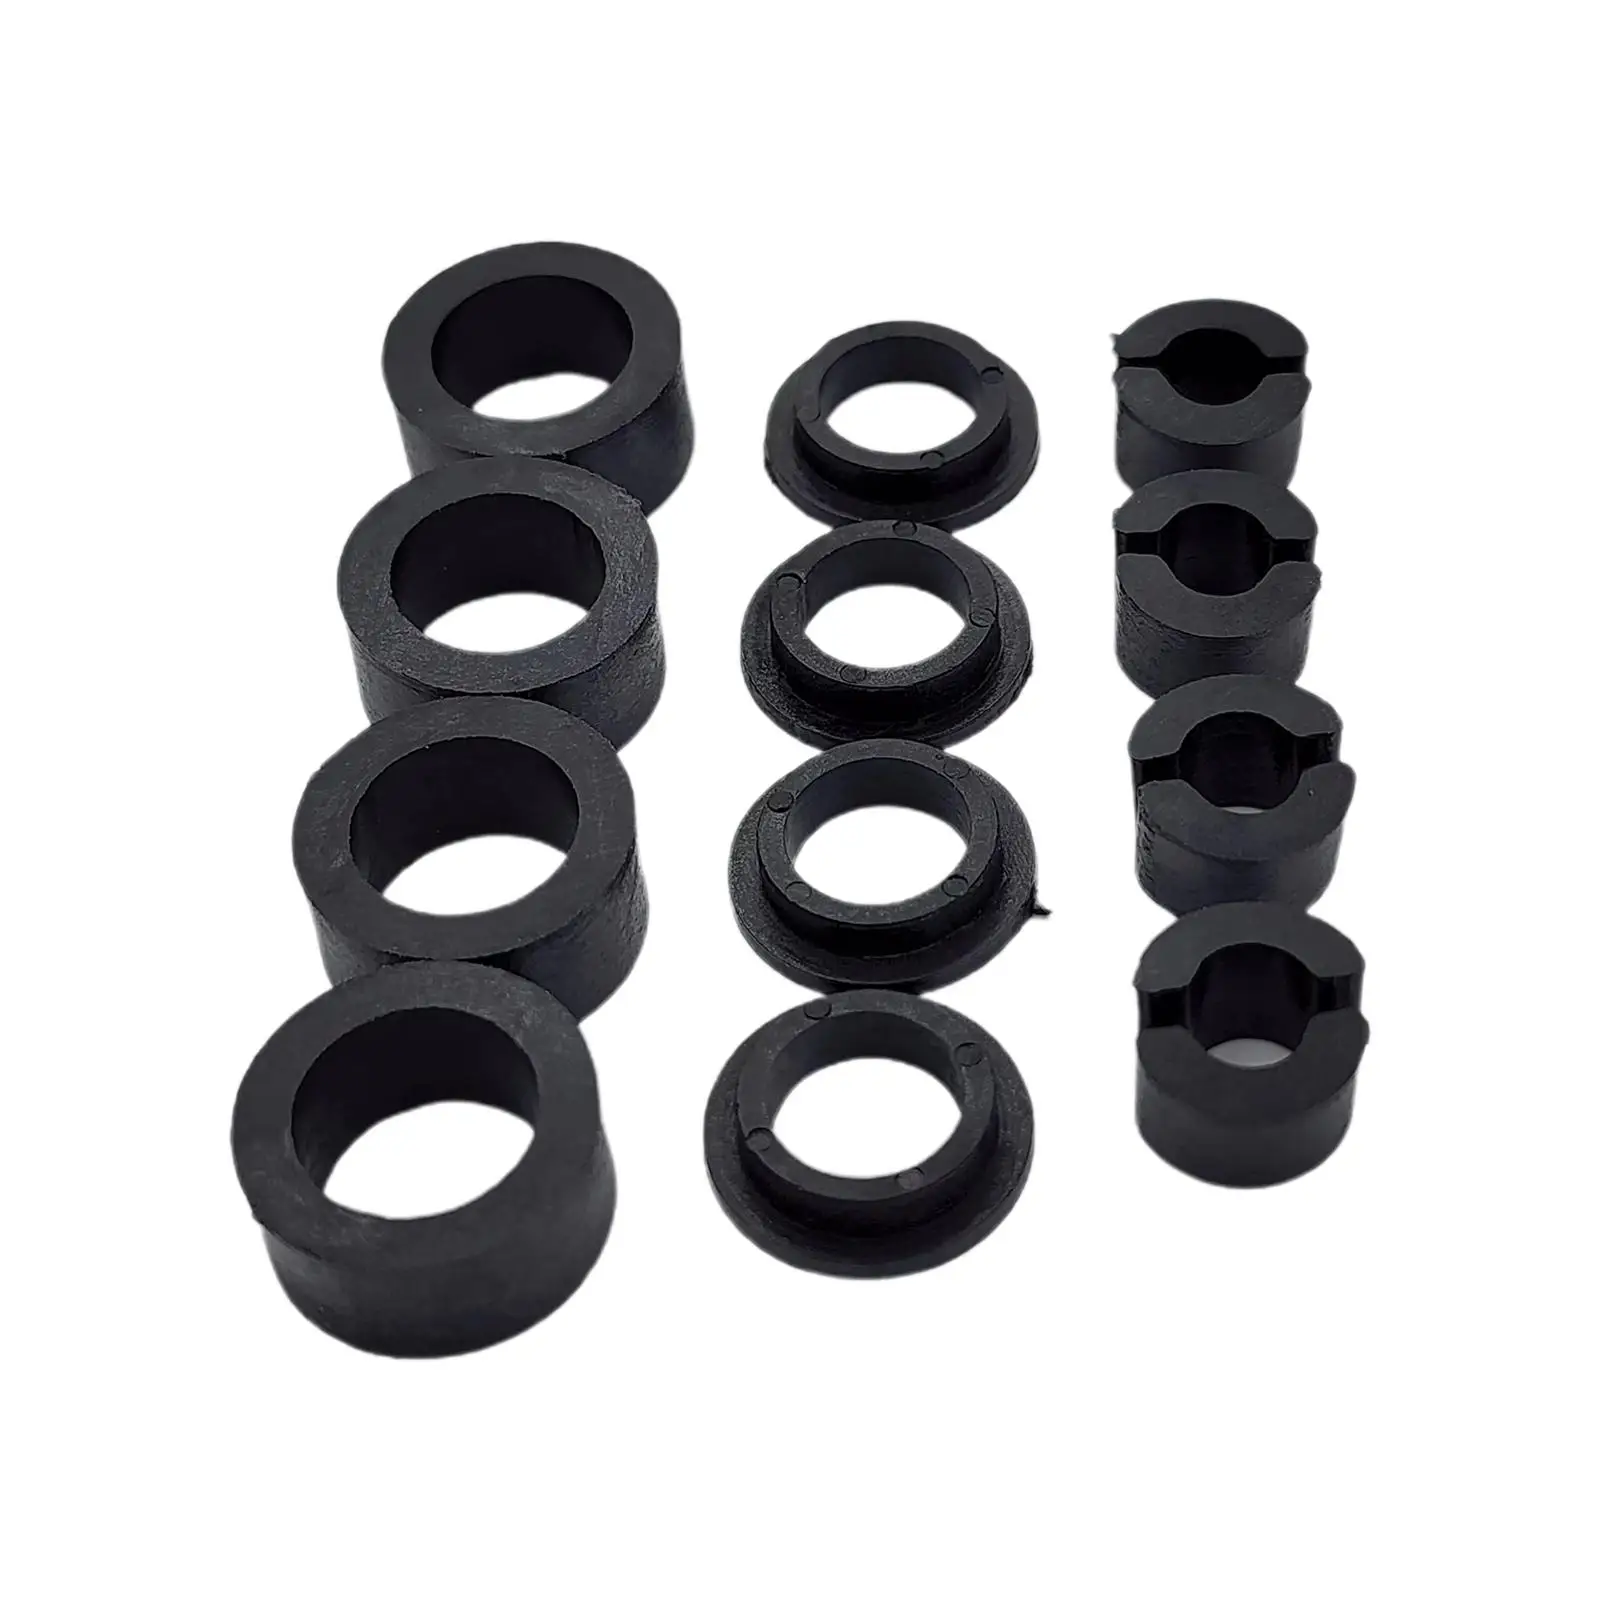 Front Seat Slider Support Bushings for TJ Lj 1998-2006 Accessories